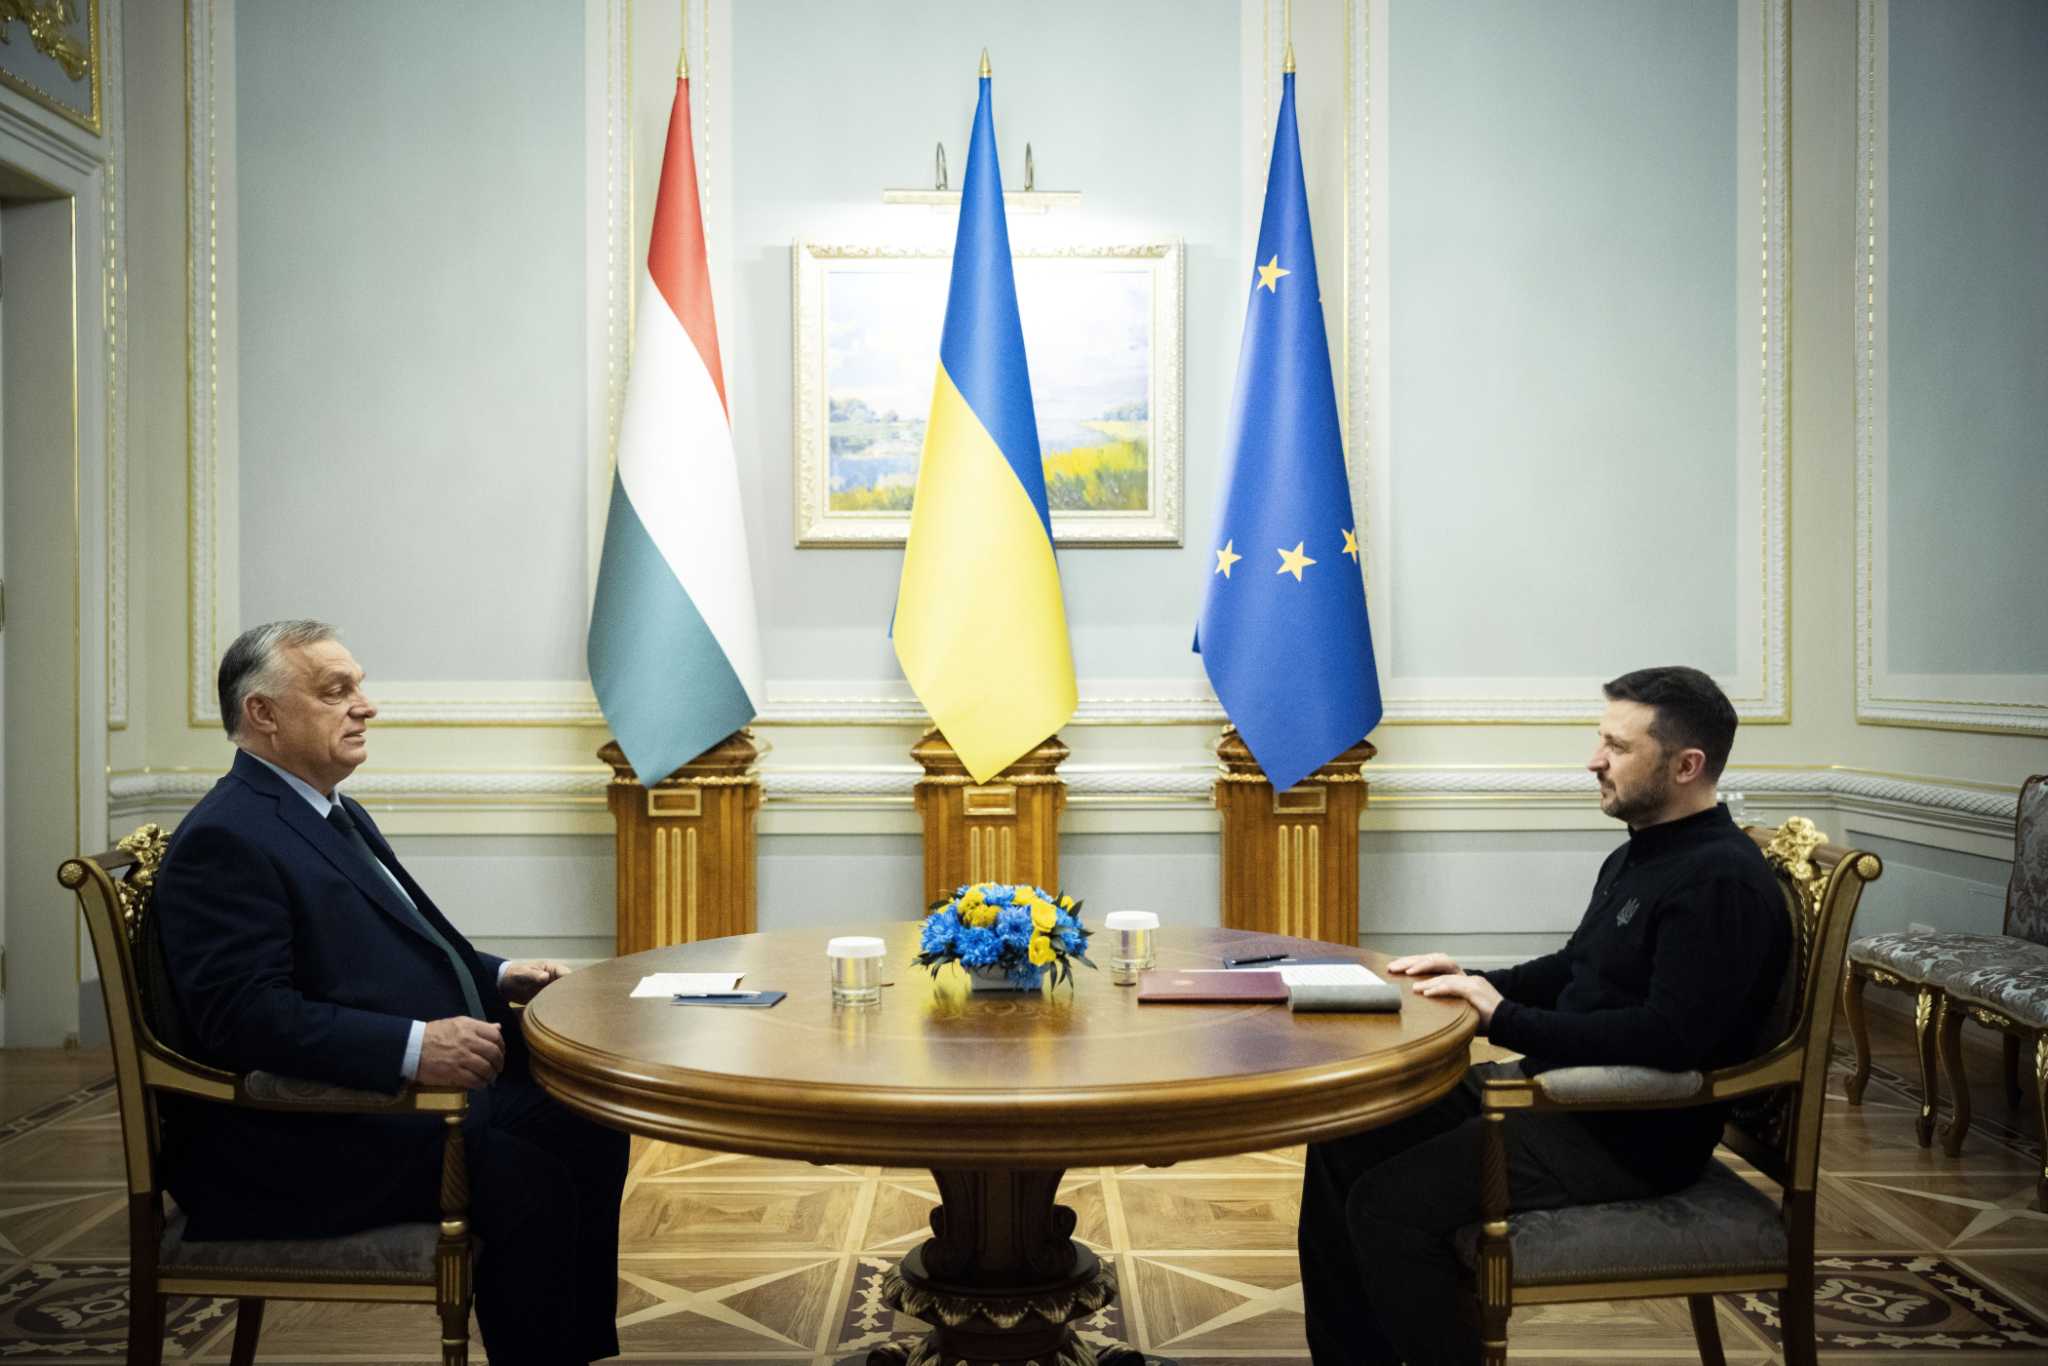 Hungary's leader is in Ukraine. It's the first visit by Russia’s top EU ally since the war began